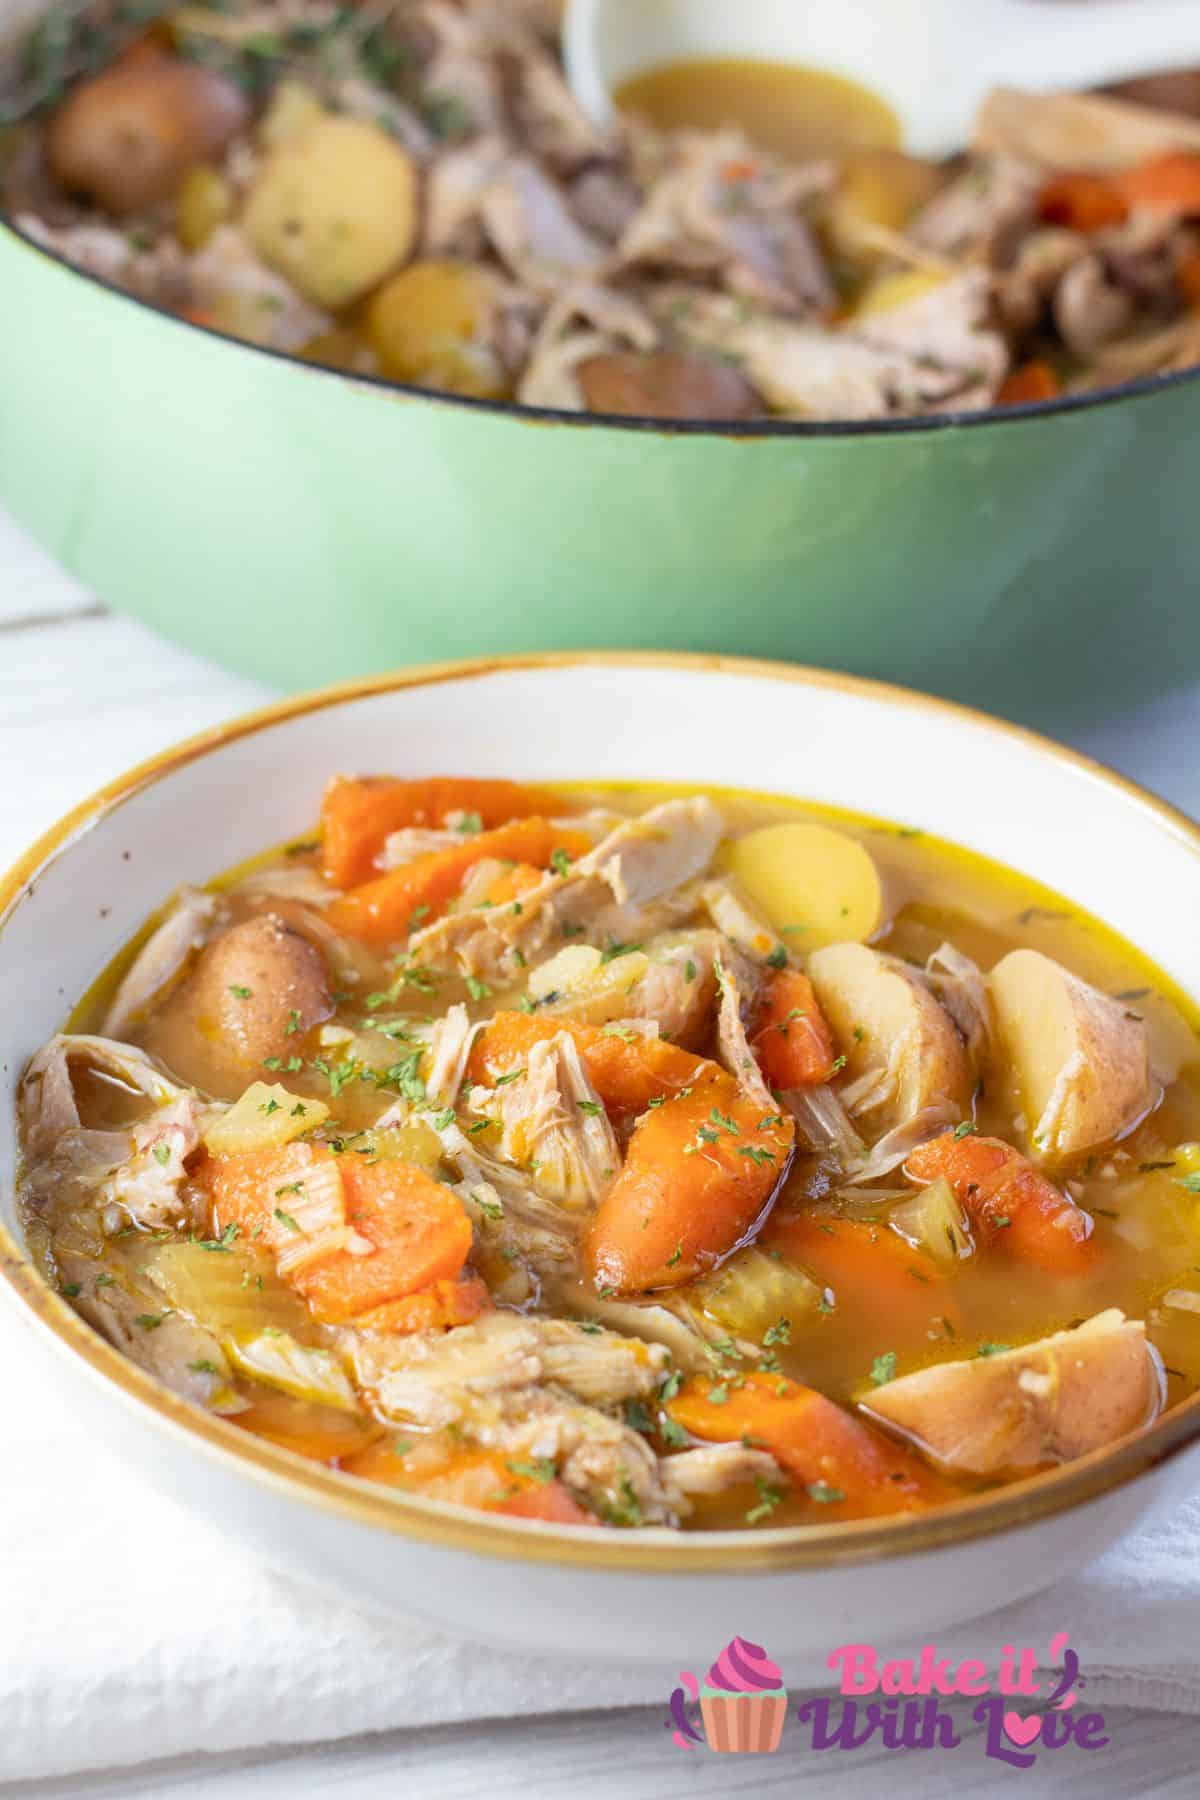 Tall image of a large bowl of rabbit stew.